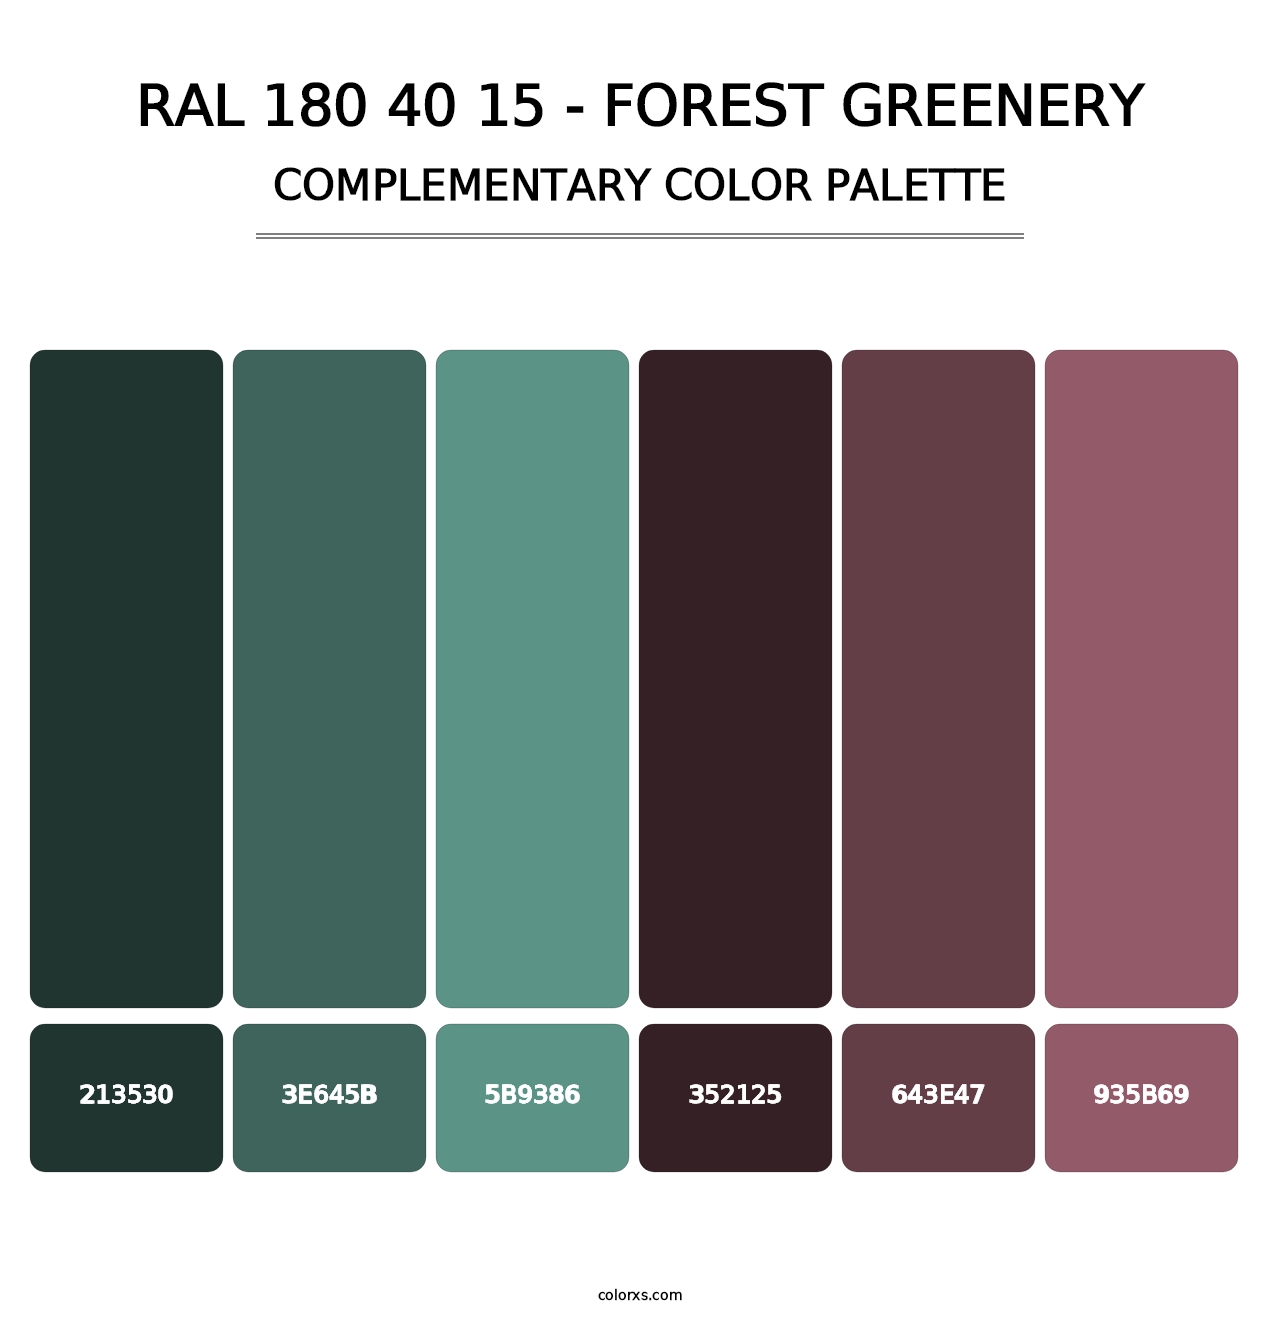 RAL 180 40 15 - Forest Greenery - Complementary Color Palette